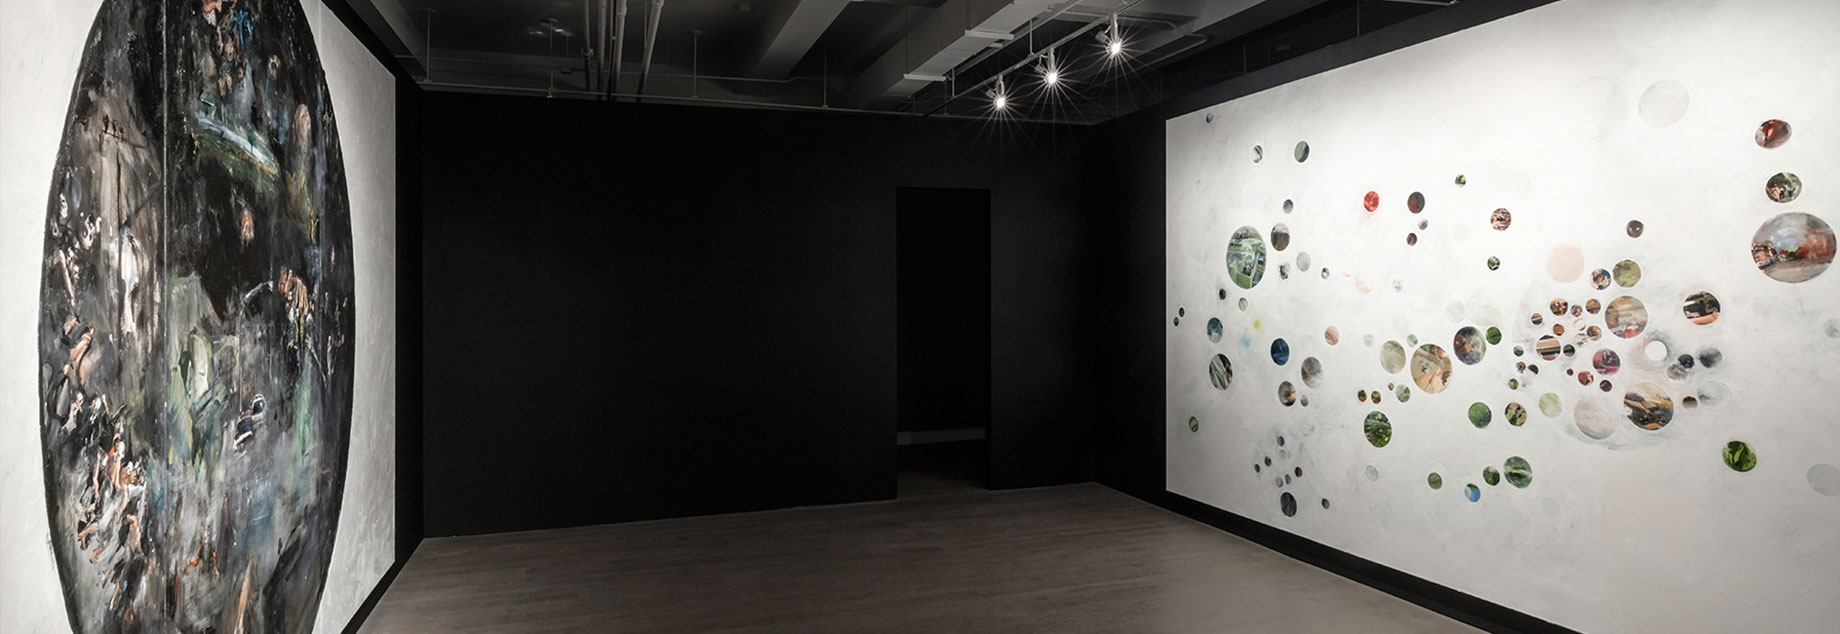 Howard Podeswa, A Brief History, installation view, Heaven (left), Hell (right), 2015. 